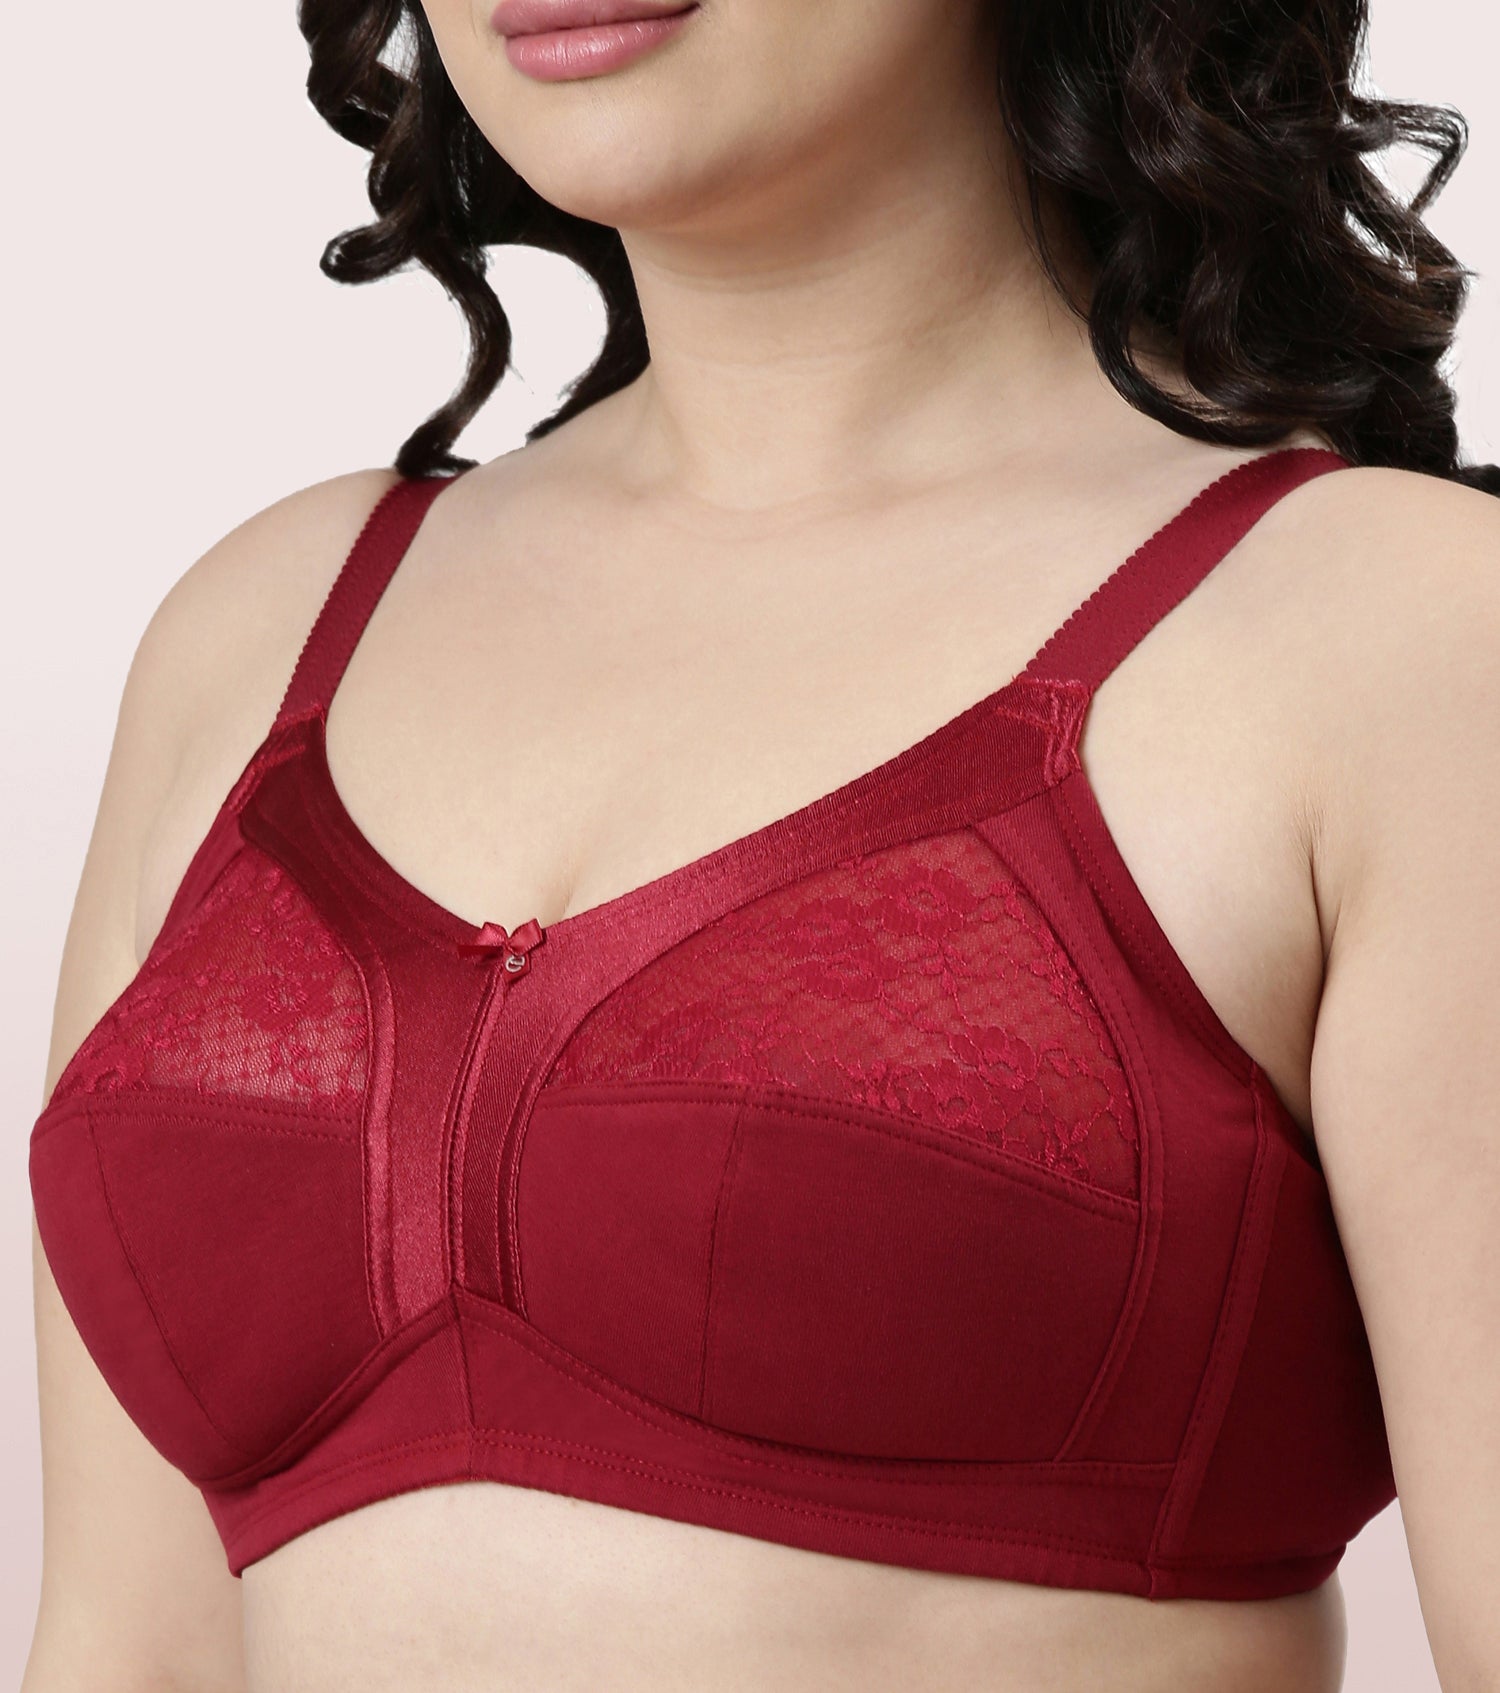 Enamor A014 Super M-Frame Contouring Full Support Bra Supima Cotton,  Non-Padded, Wirefree & Full Coverage in Chennai at best price by New  Varietty Choice - Justdial